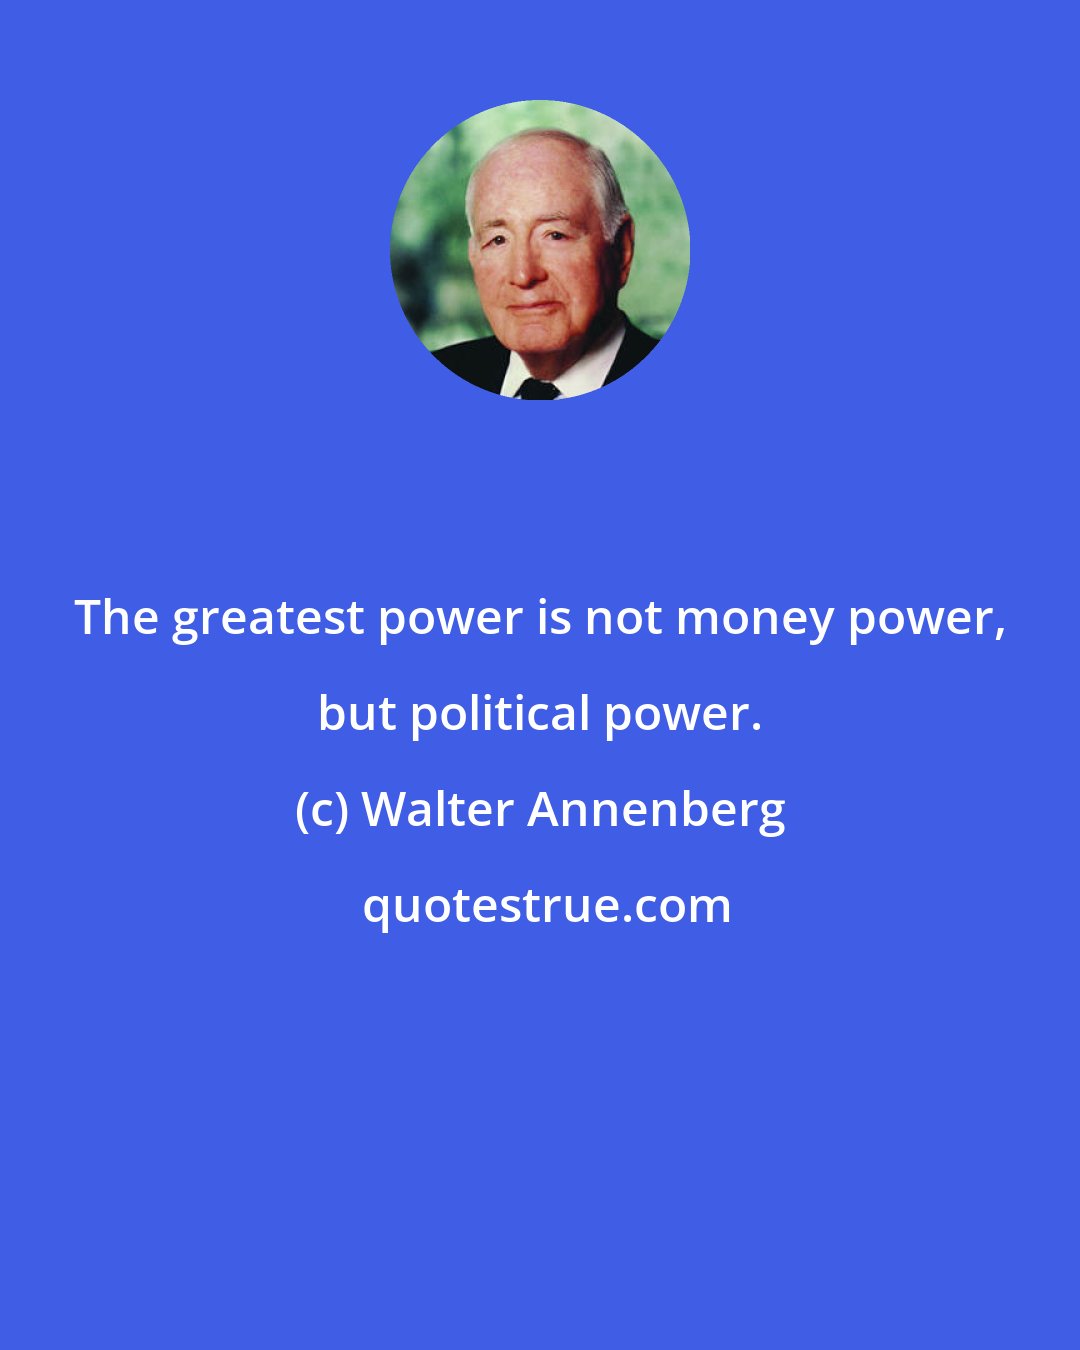 Walter Annenberg: The greatest power is not money power, but political power.